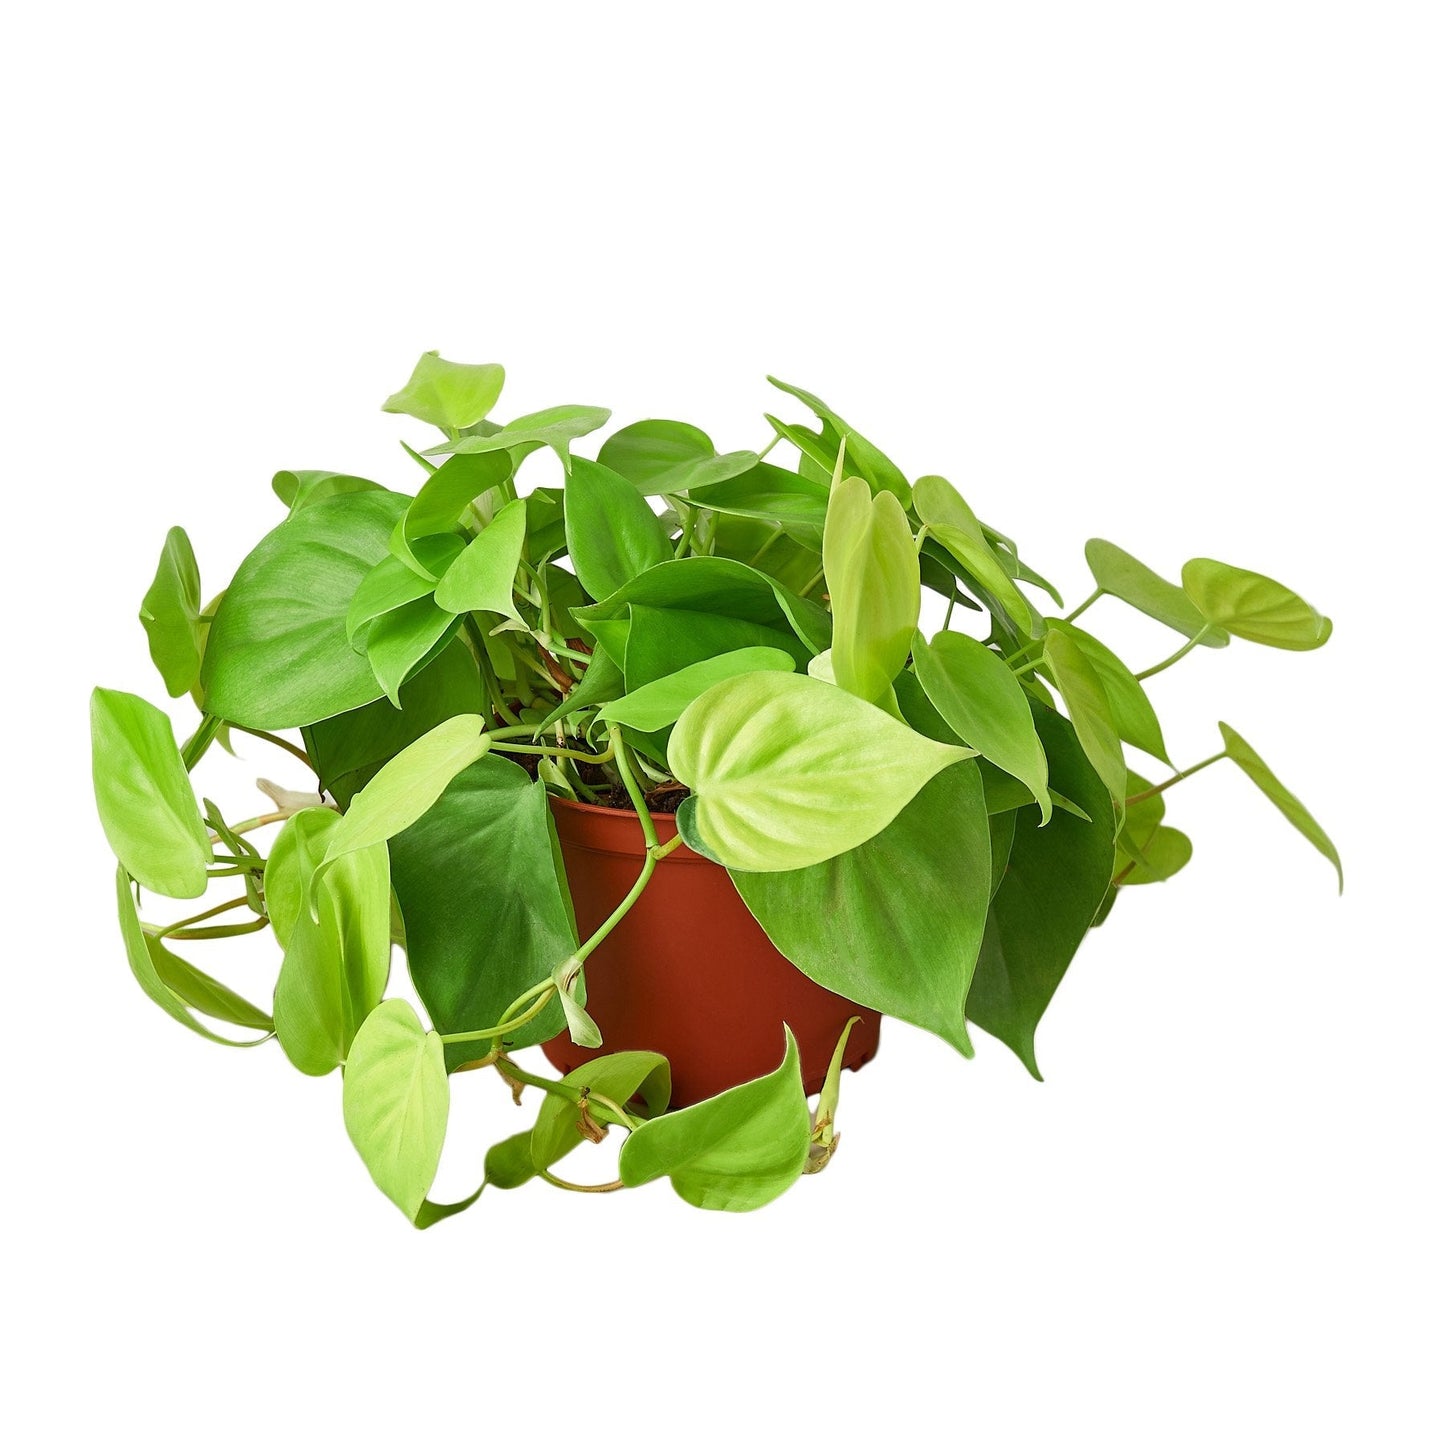 Philodendron 'Neon' - 4" Pot - NURSERY POT ONLY